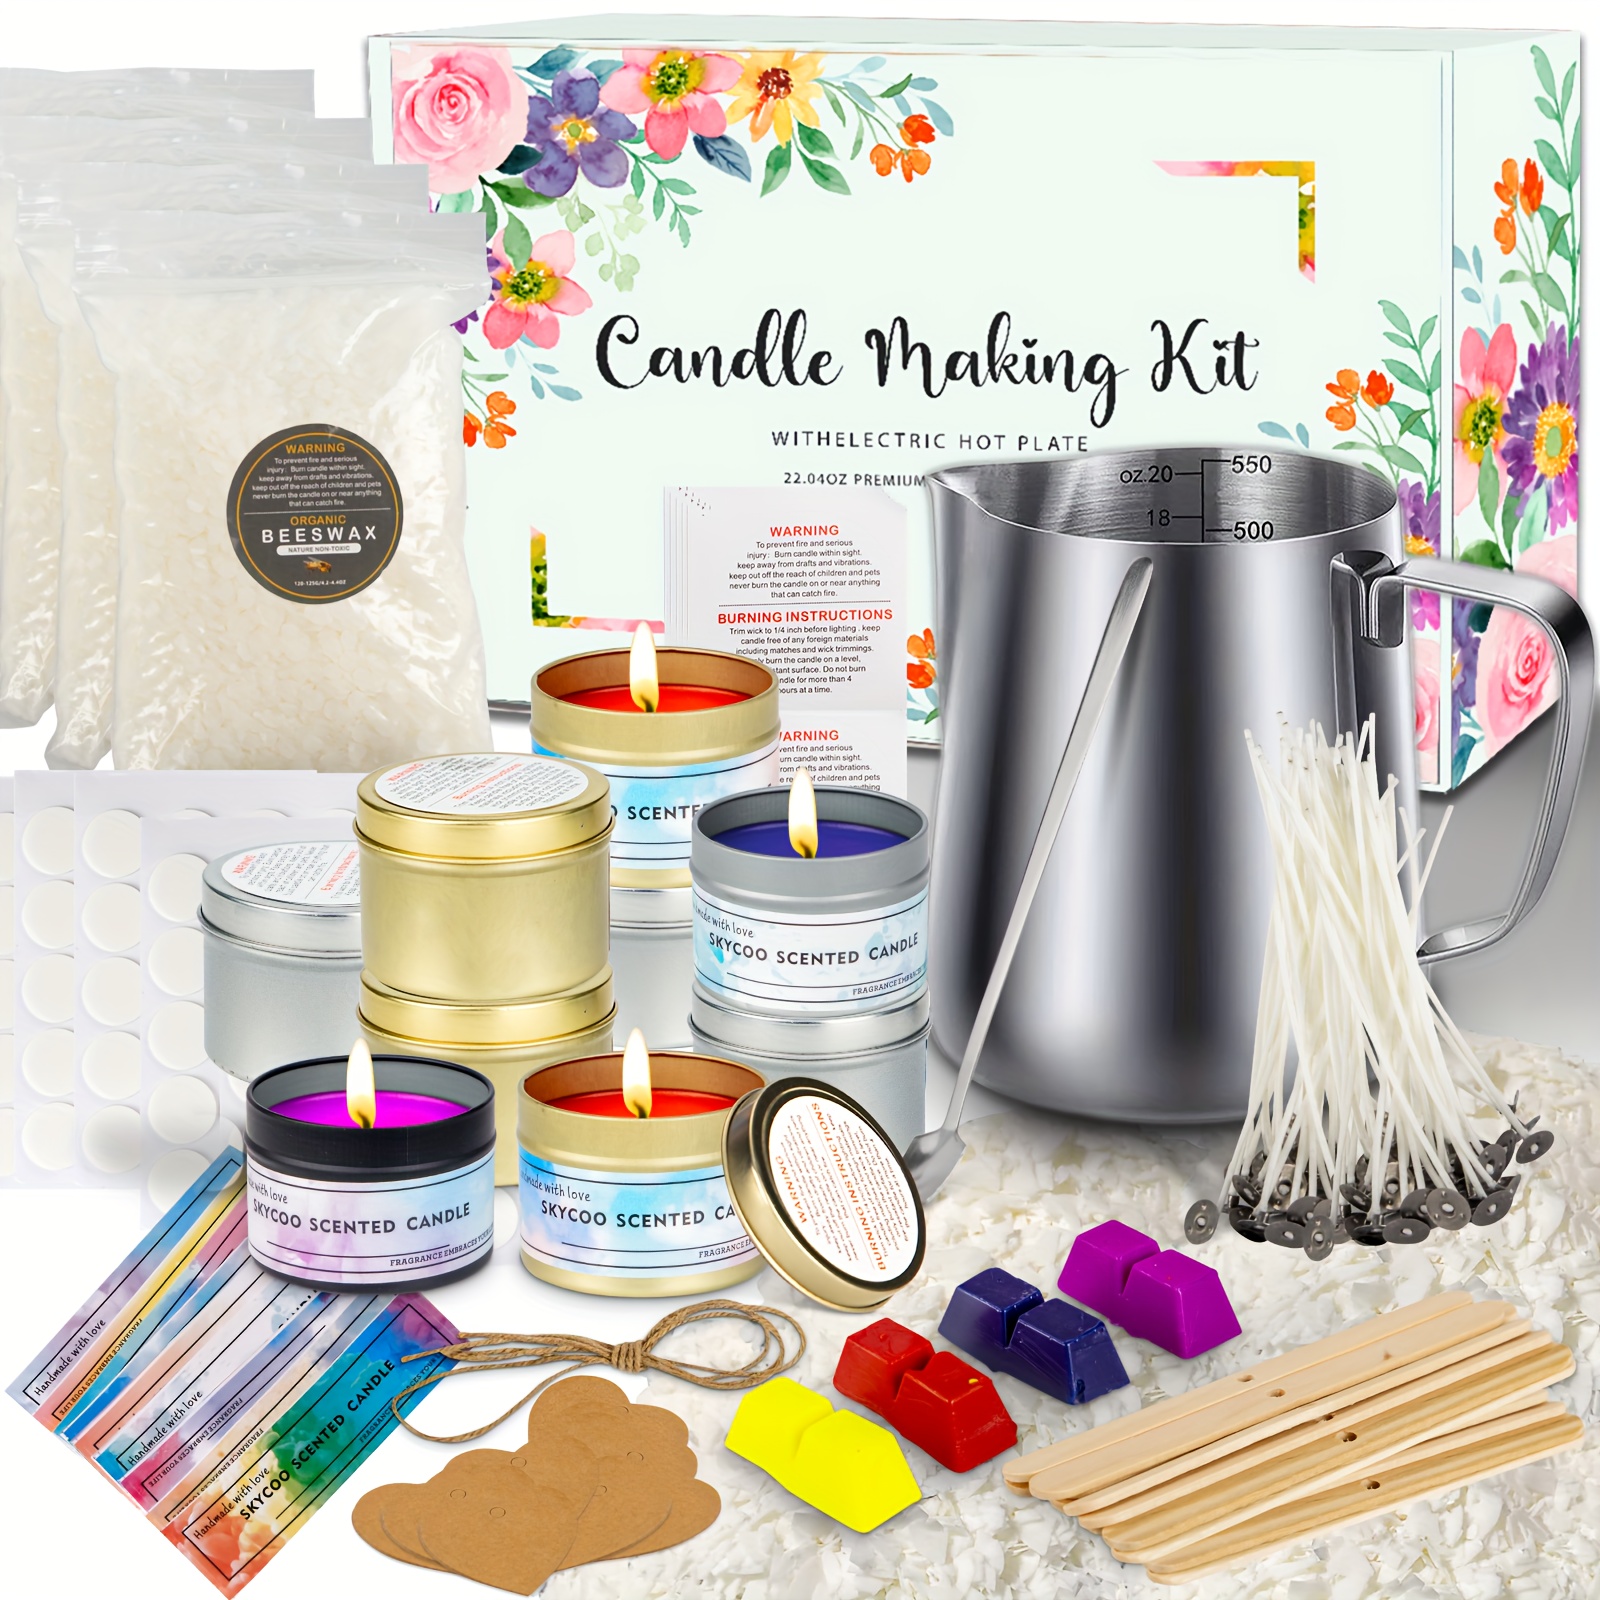 Candle Making Kit - Soy Wax Candle Making Set - Storage Box with Glass Jars  & Complete Candle Making Supplies - DIY Craft Kits for Adults - Arts and  Crafts - Perfect